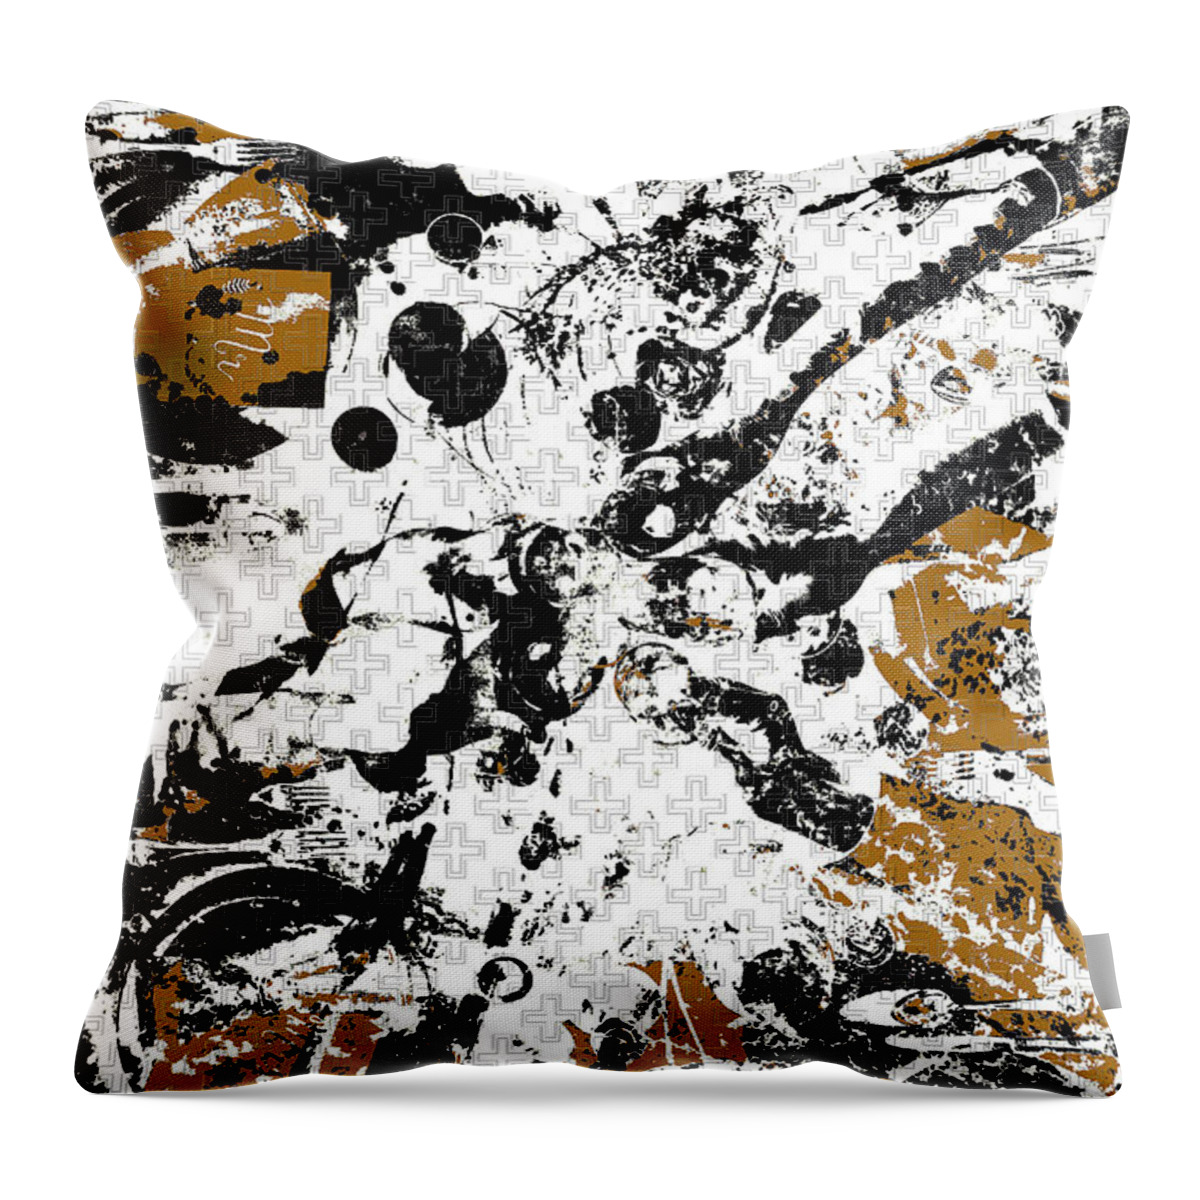 Jesus Throw Pillow featuring the digital art Restore by Payet Emmanuel